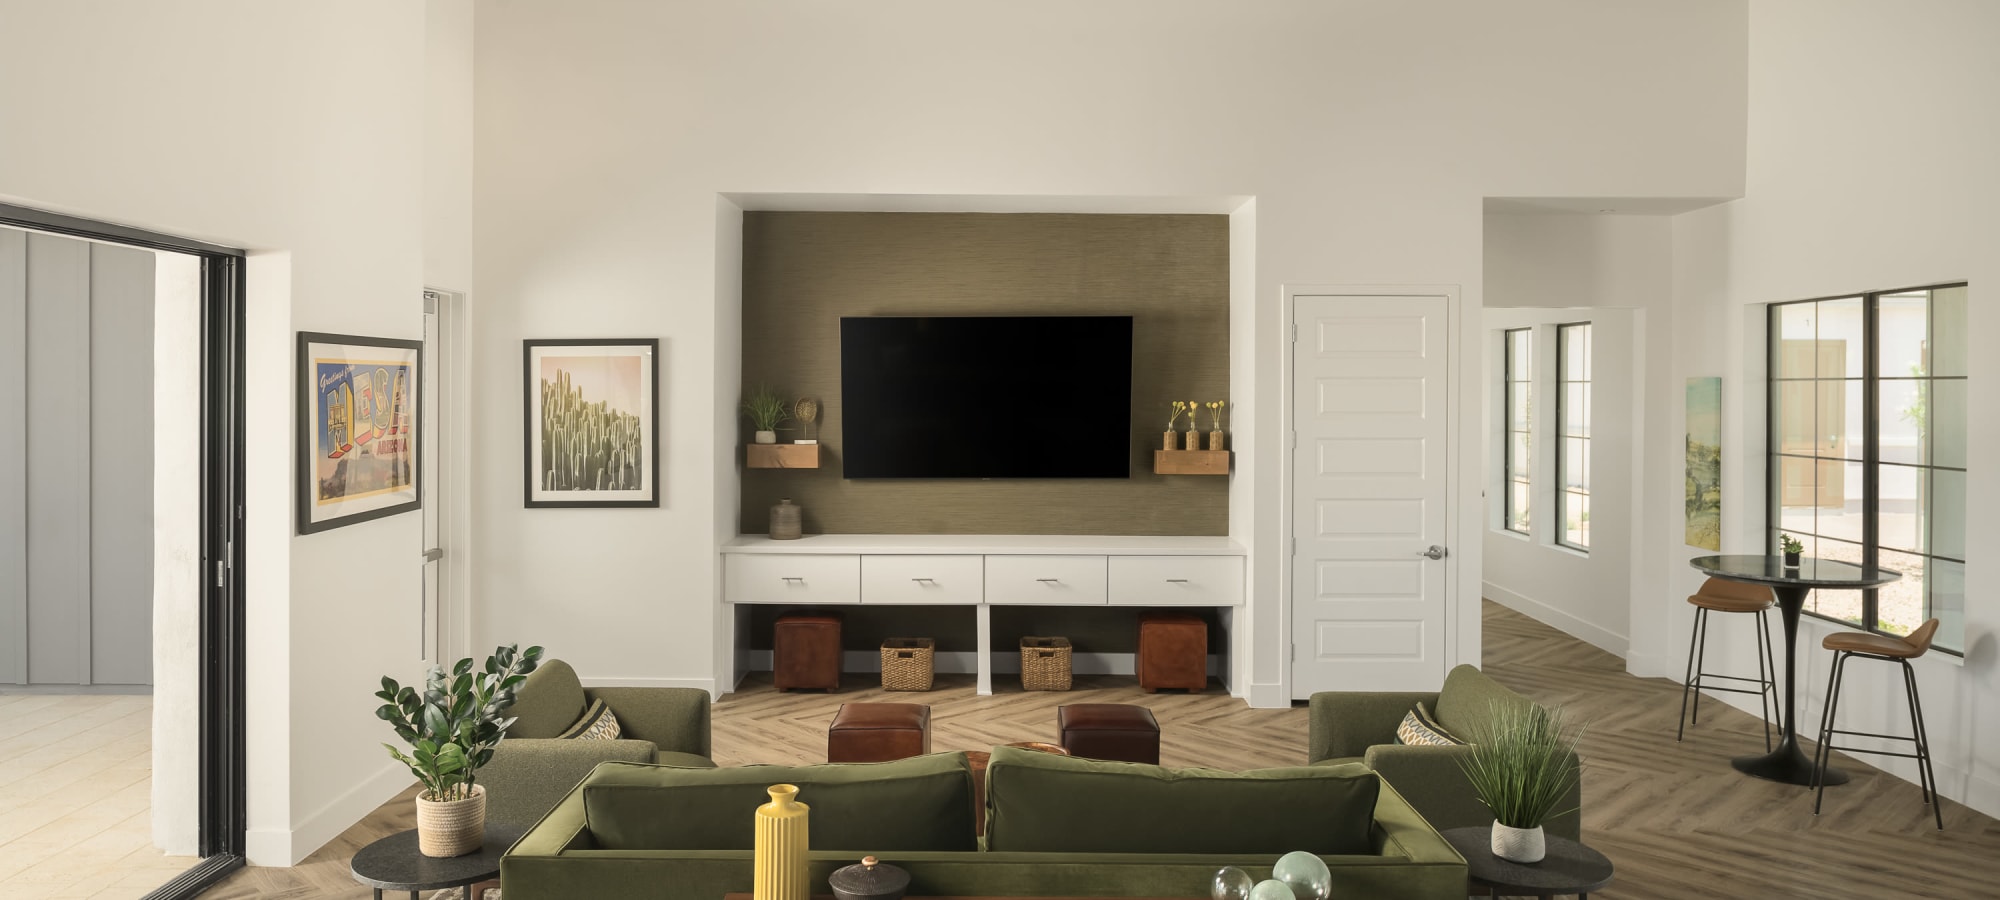 TV area in resident clubhouse at Sobremesa Villas in Surprise, Arizona